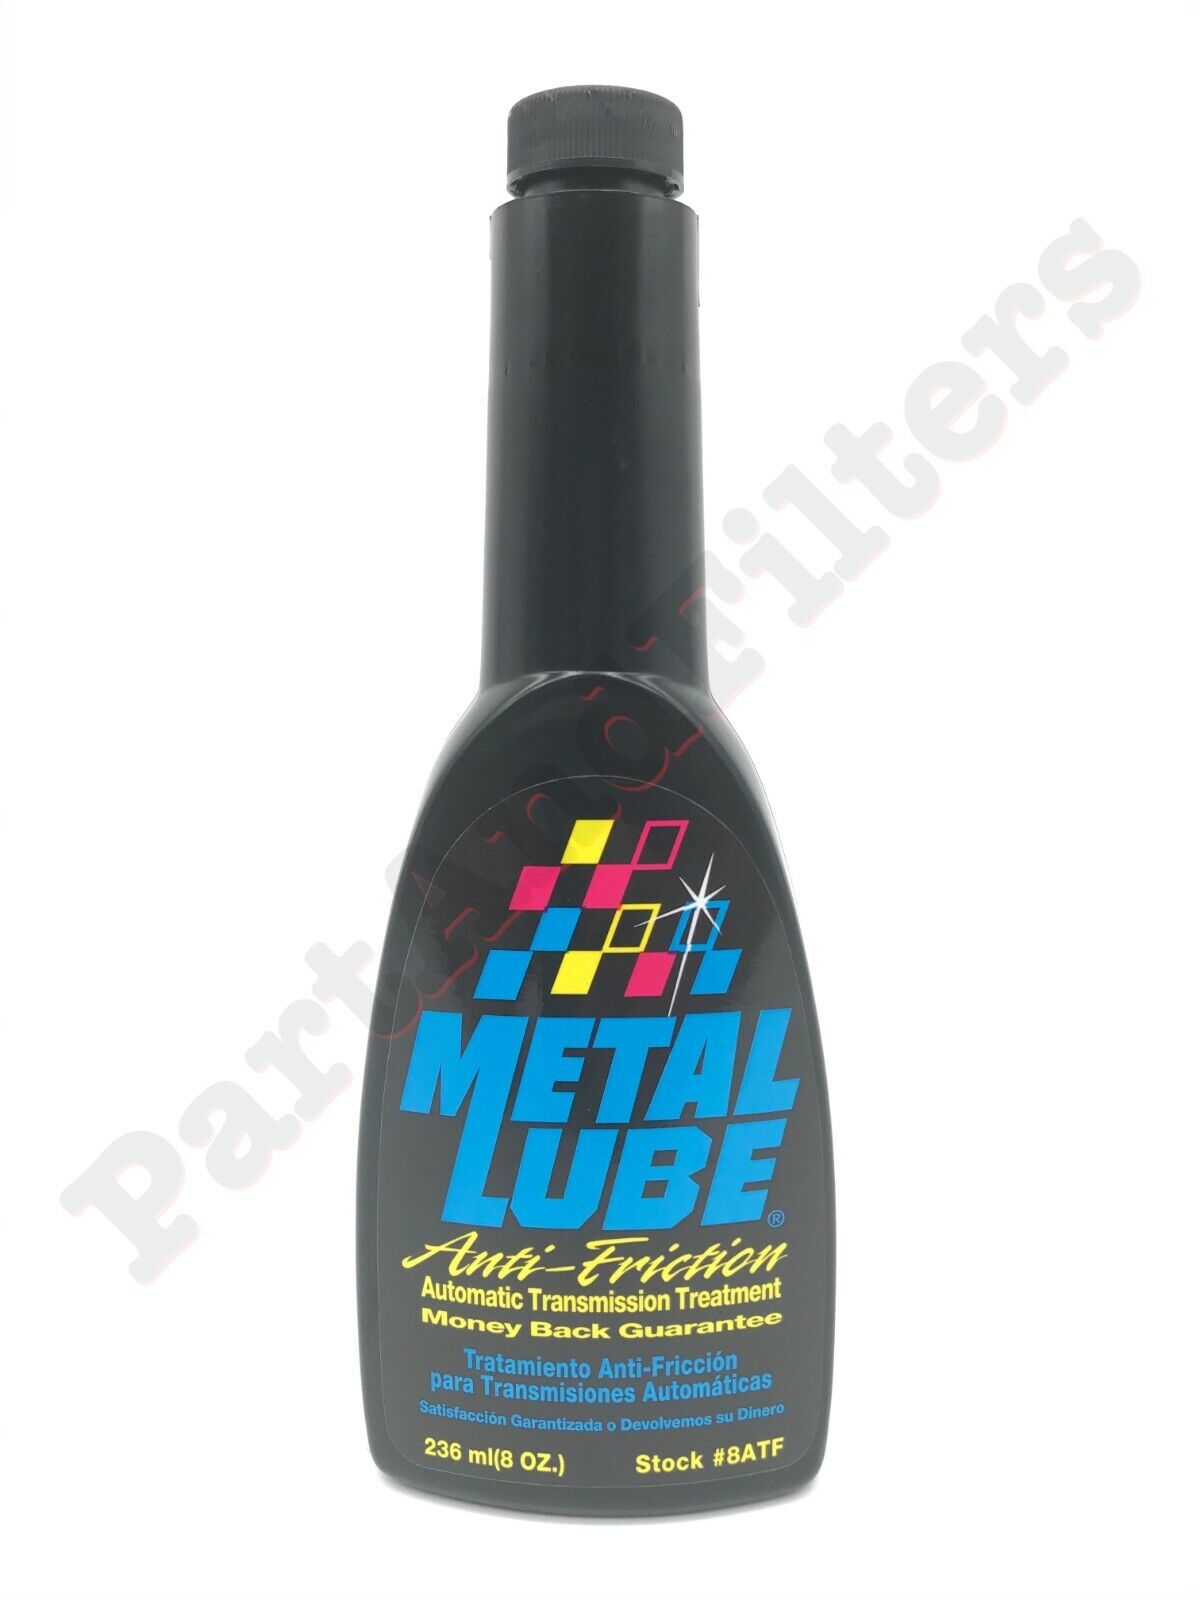 Metal Lube Anti-Friction Automatic 8 Oz Max 86% OFF Tampa Mall Transmission Treatment